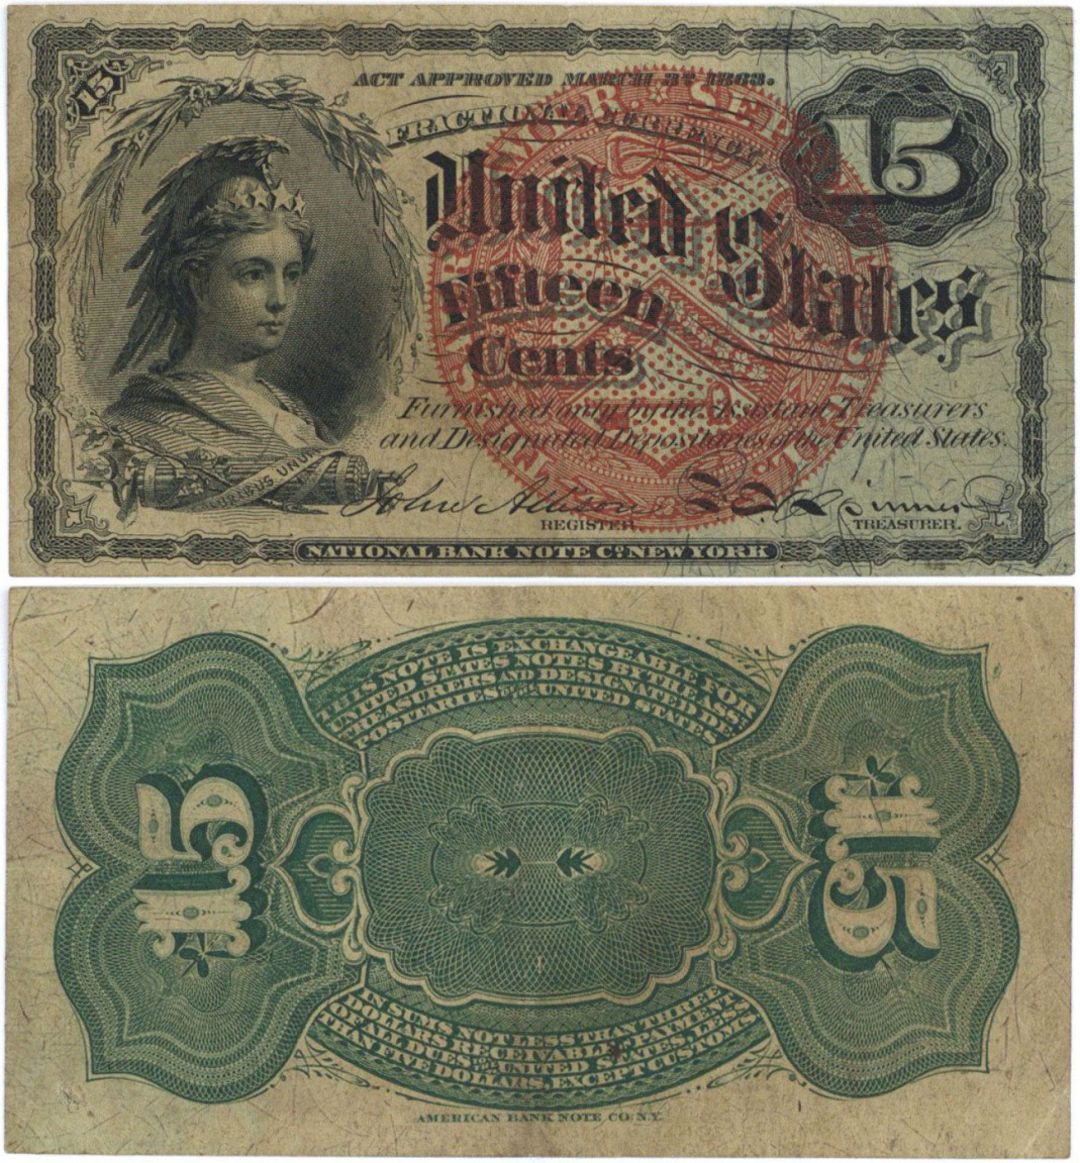 Fractional Currency - FR-1271 - 1863 dated US Currency - VERY FINE Condition